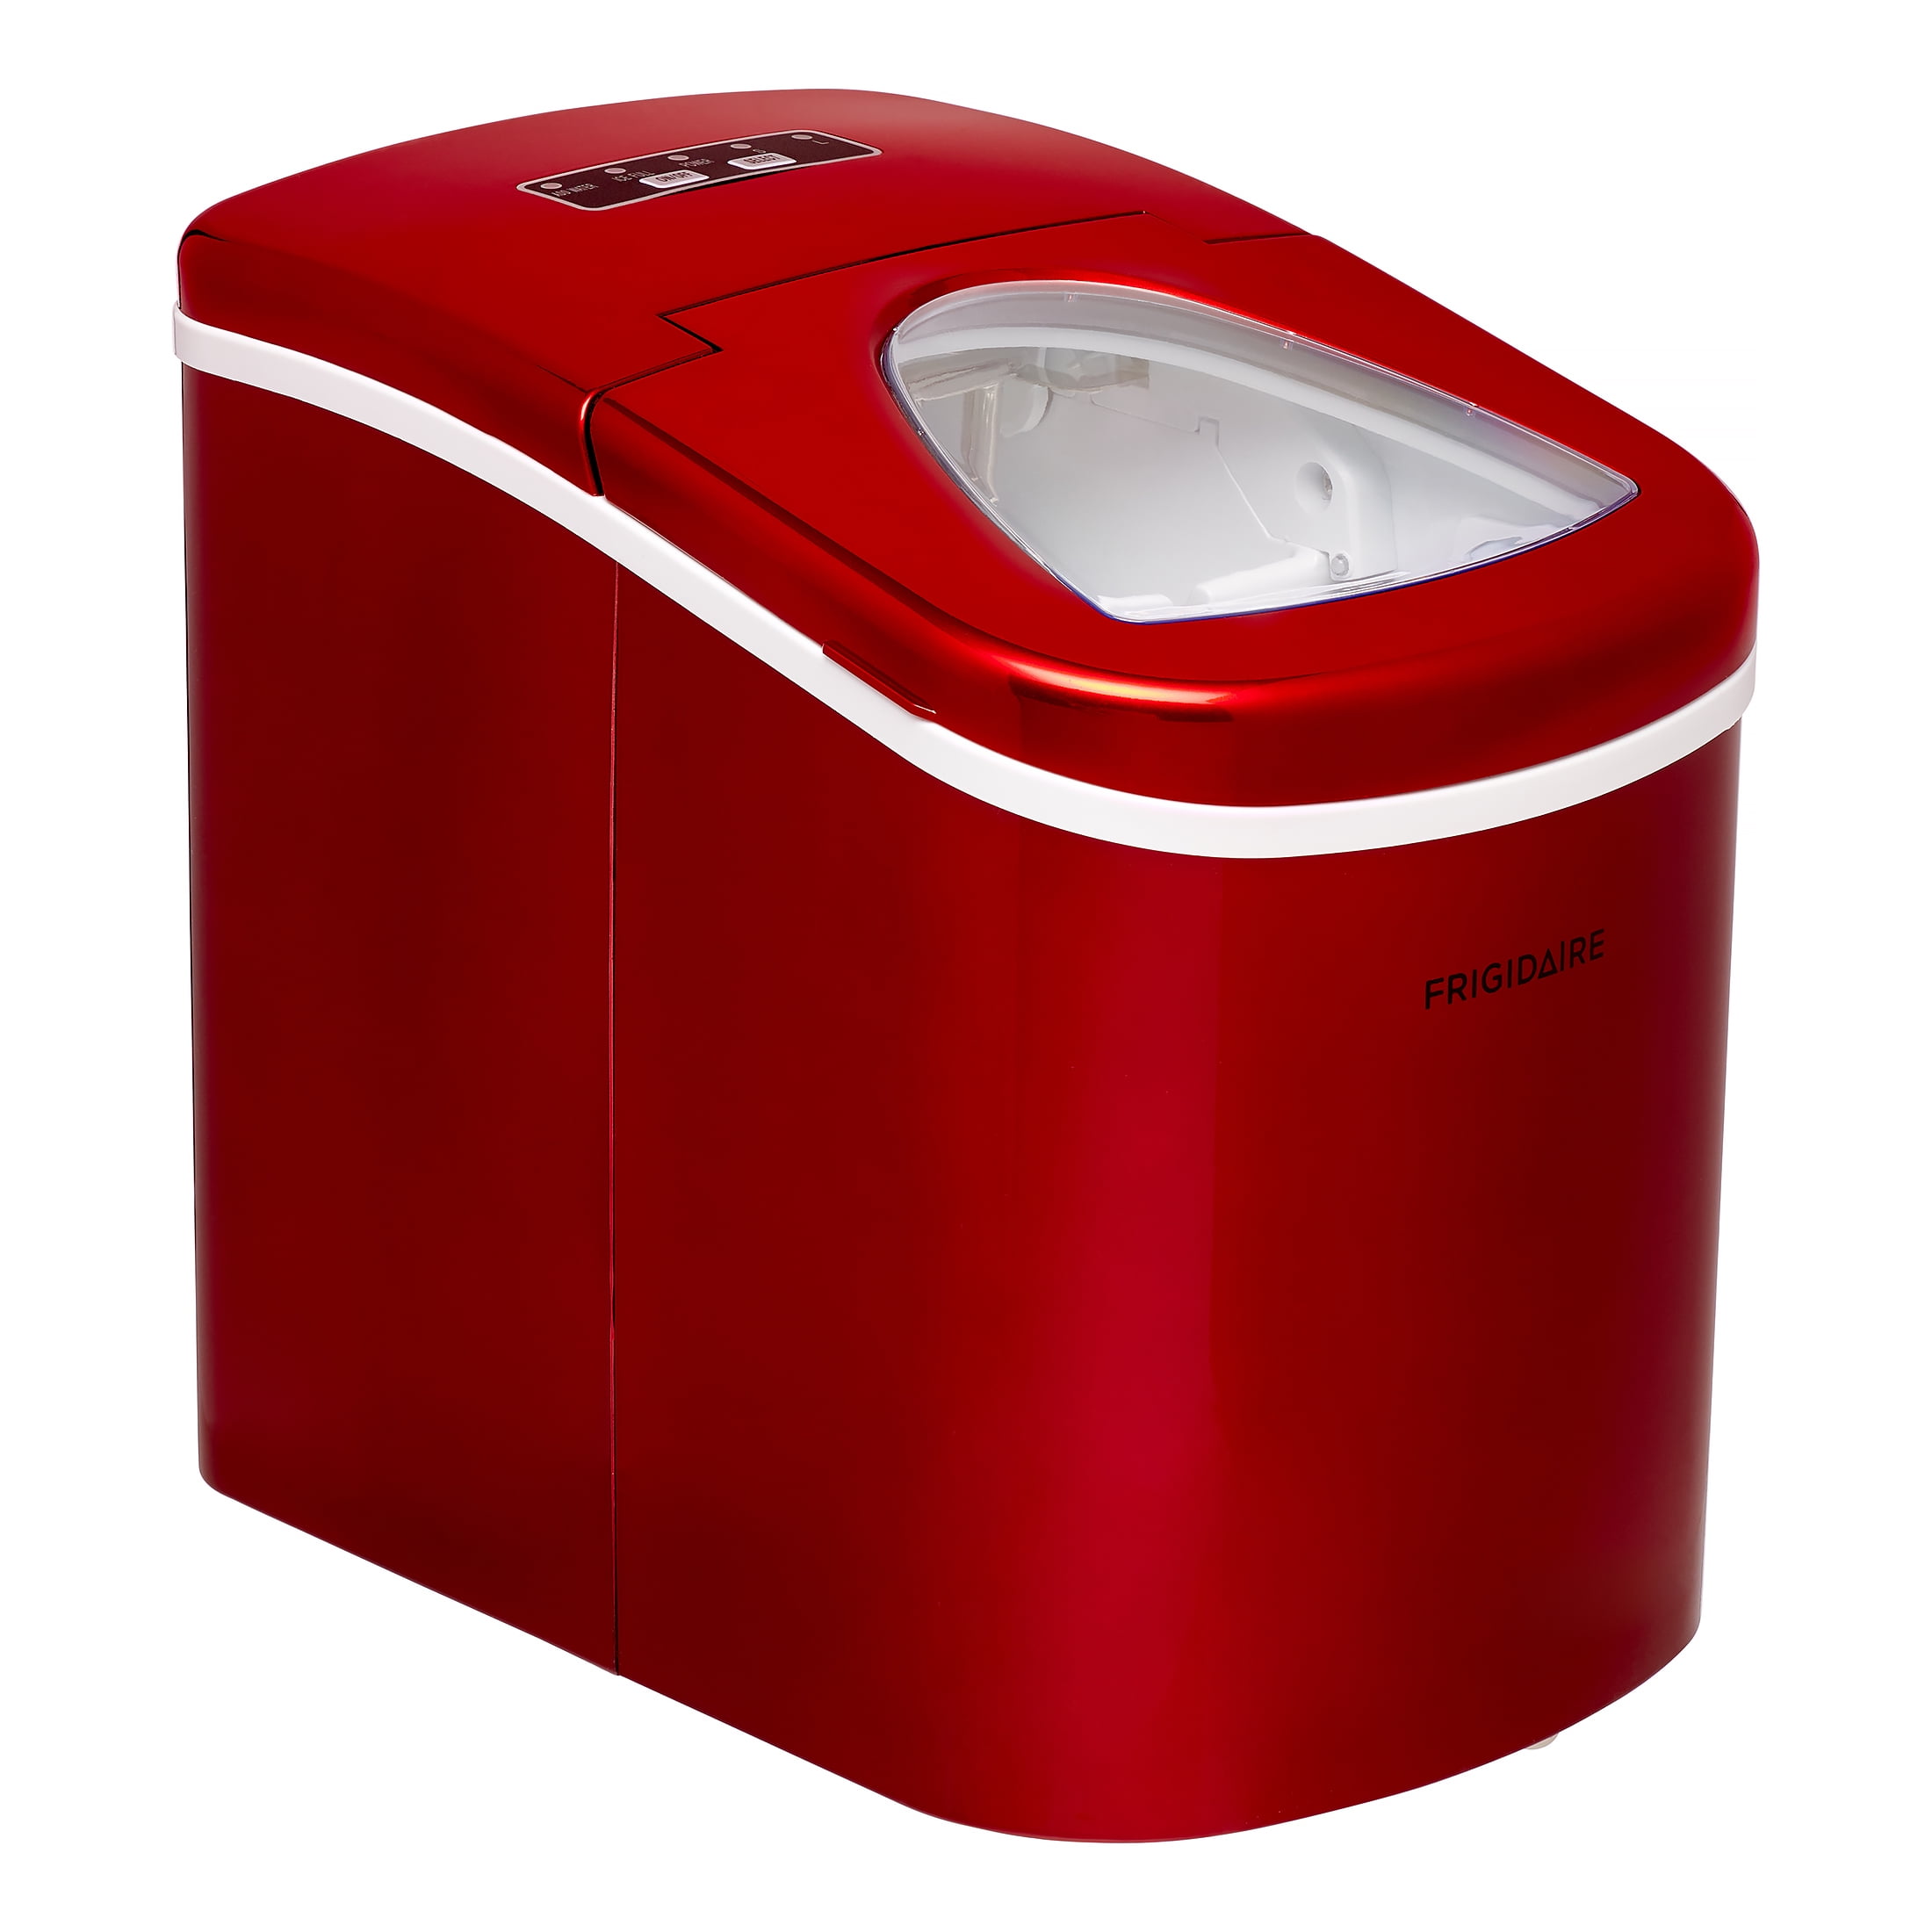 Frigidaire Countertop 26-Pound Ice Maker Red